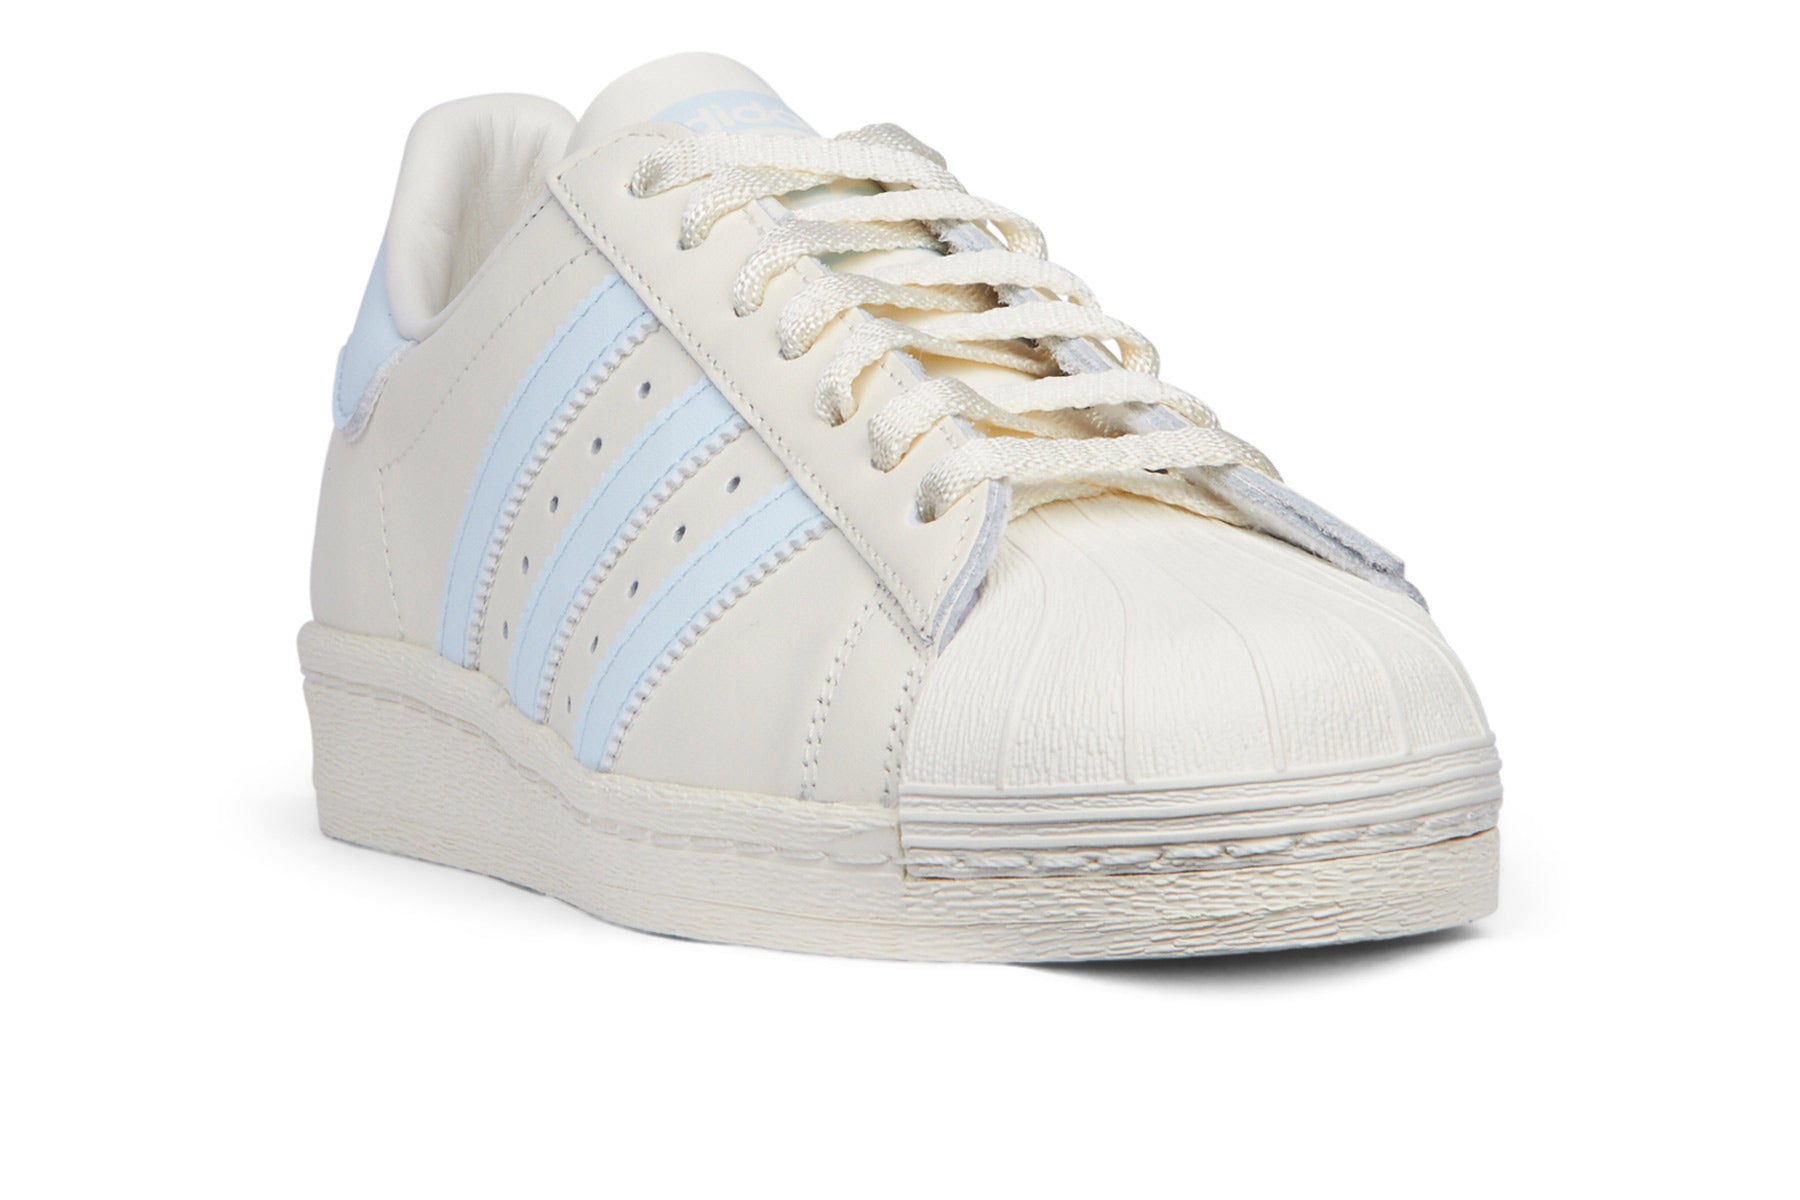 Adidas Superstar 82 - Cloud White/Sky Tint/Off White